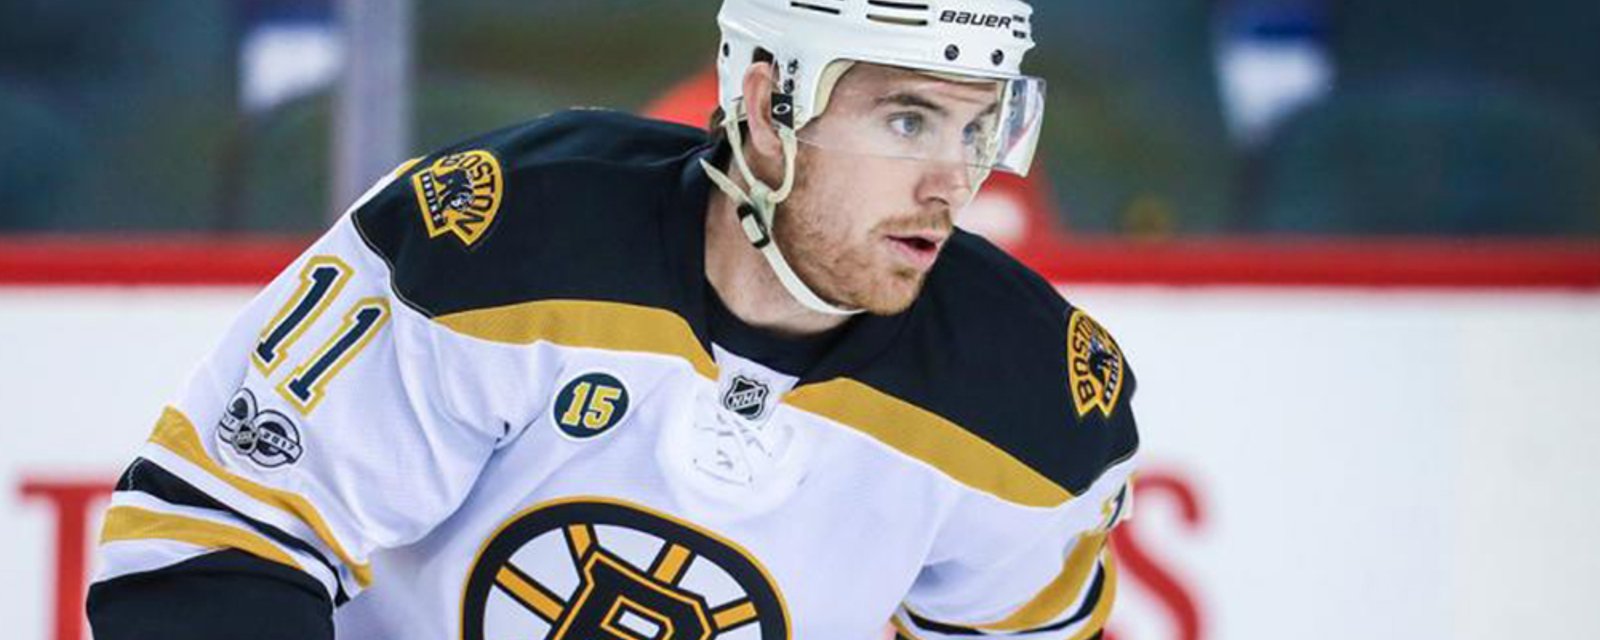 NHL teams pay tribute to Jimmy Hayes, who passed away earlier today